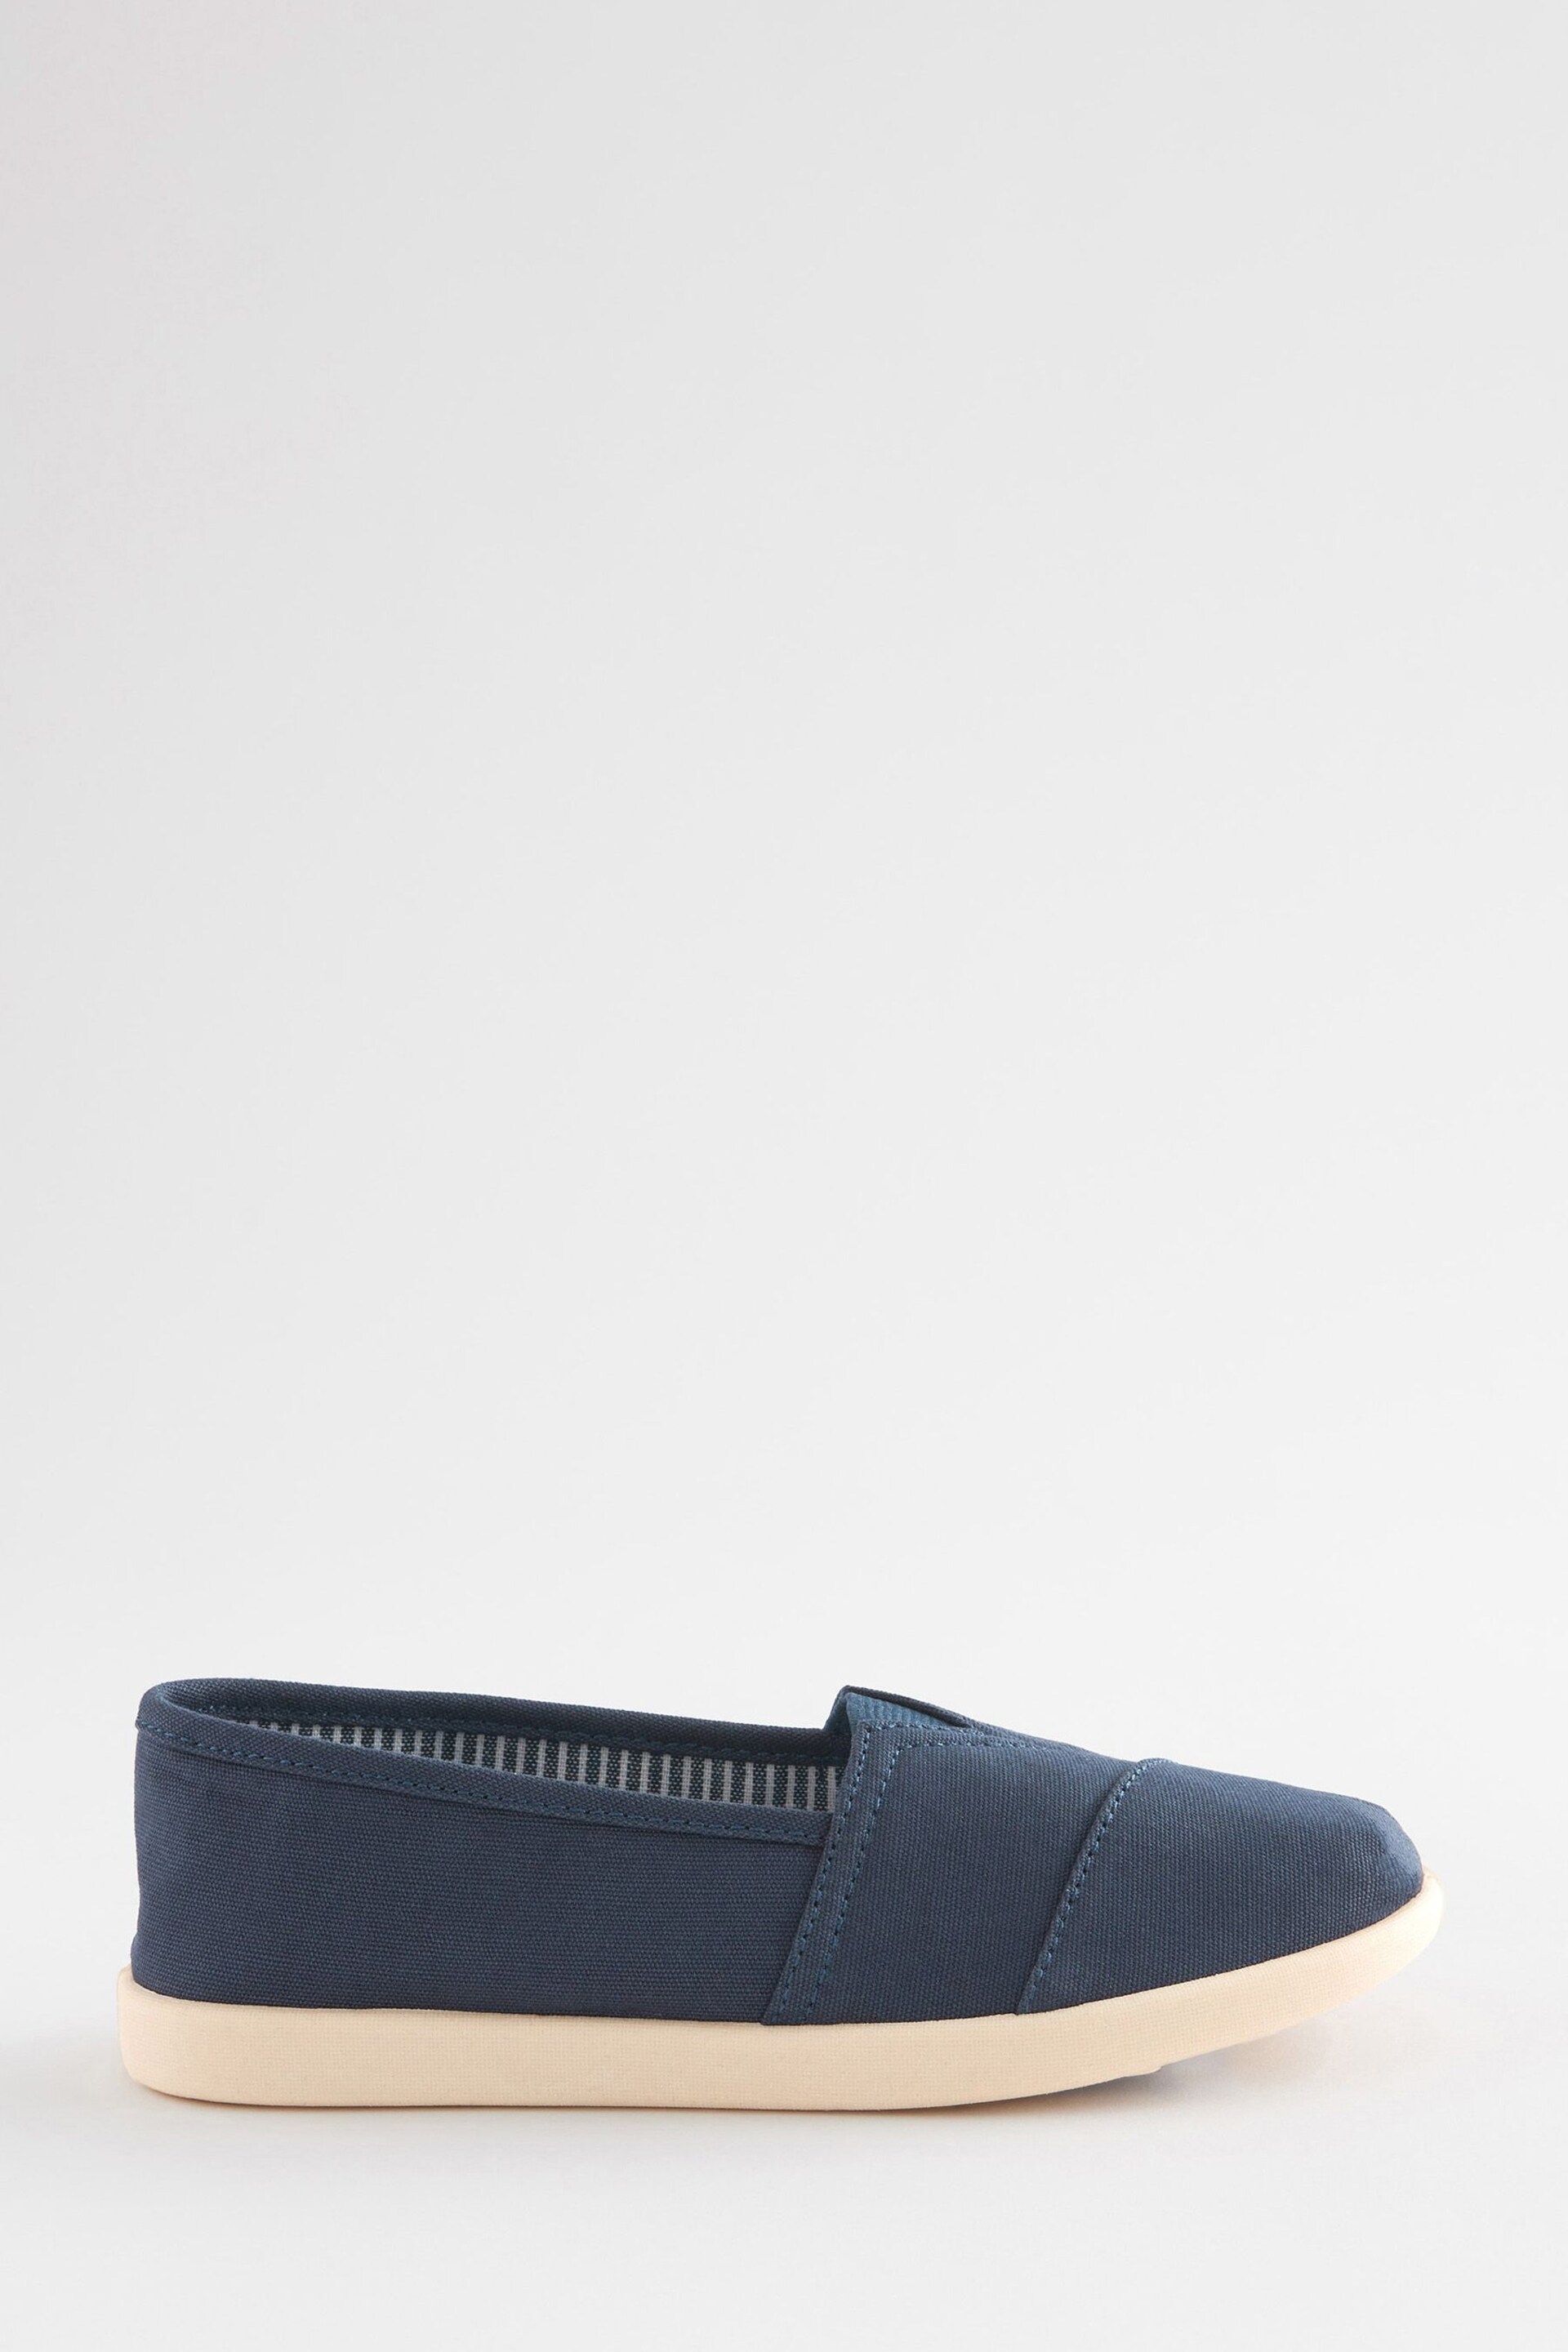 Navy Blue Canvas Slip-Ons Shoes - Image 2 of 4